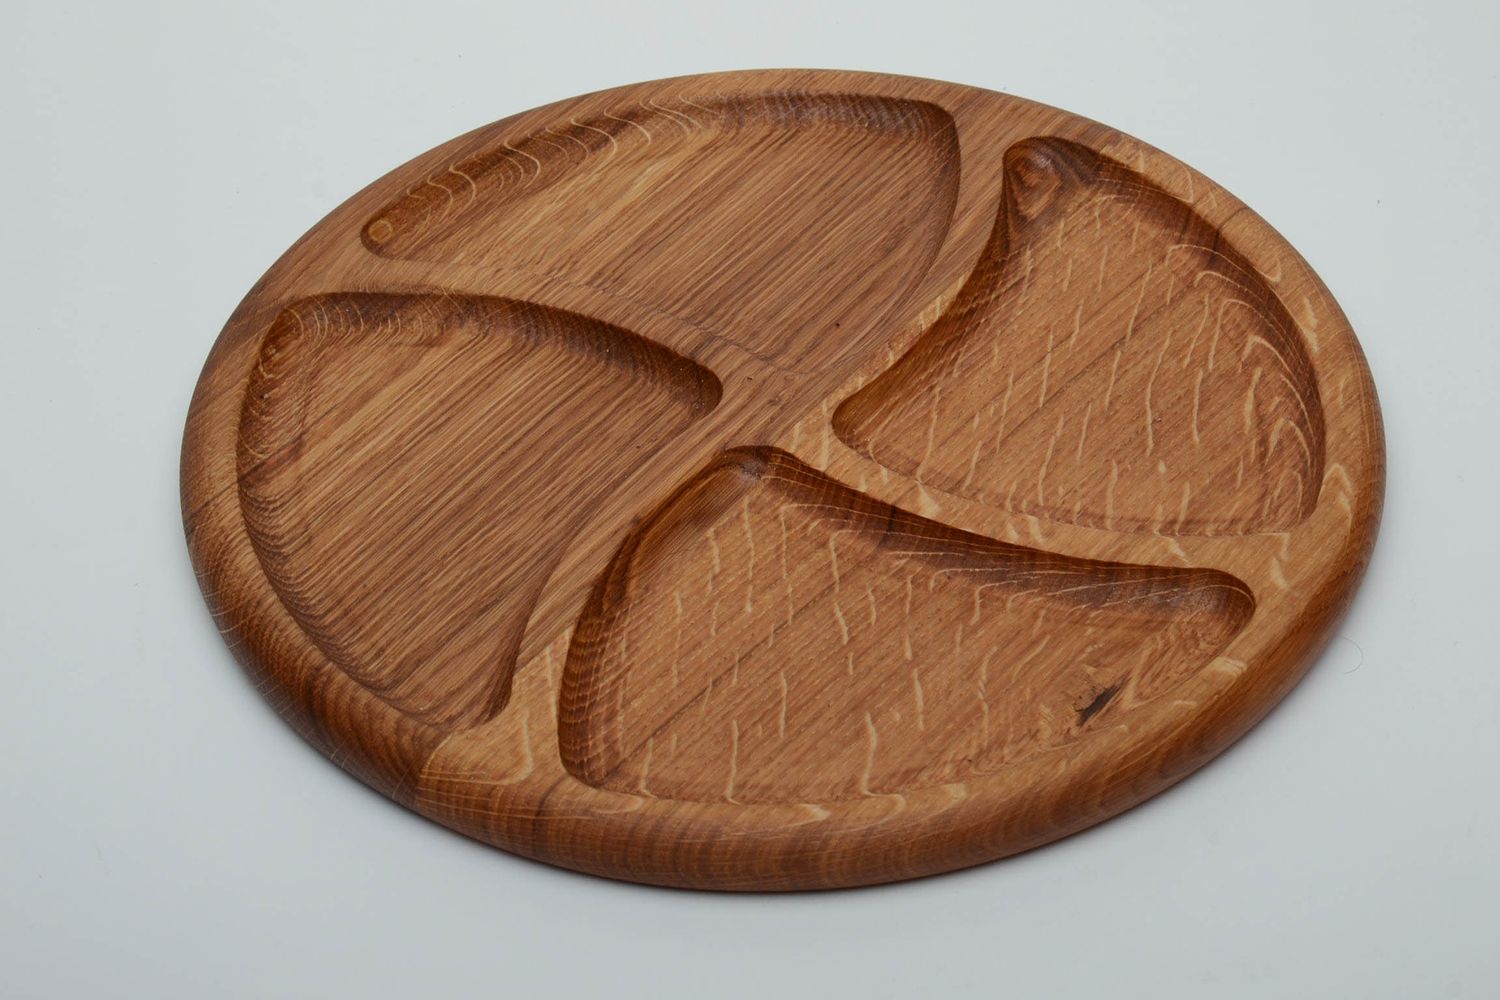 Wooden compartmental dish with 4 departments covered with linseed oil photo 3